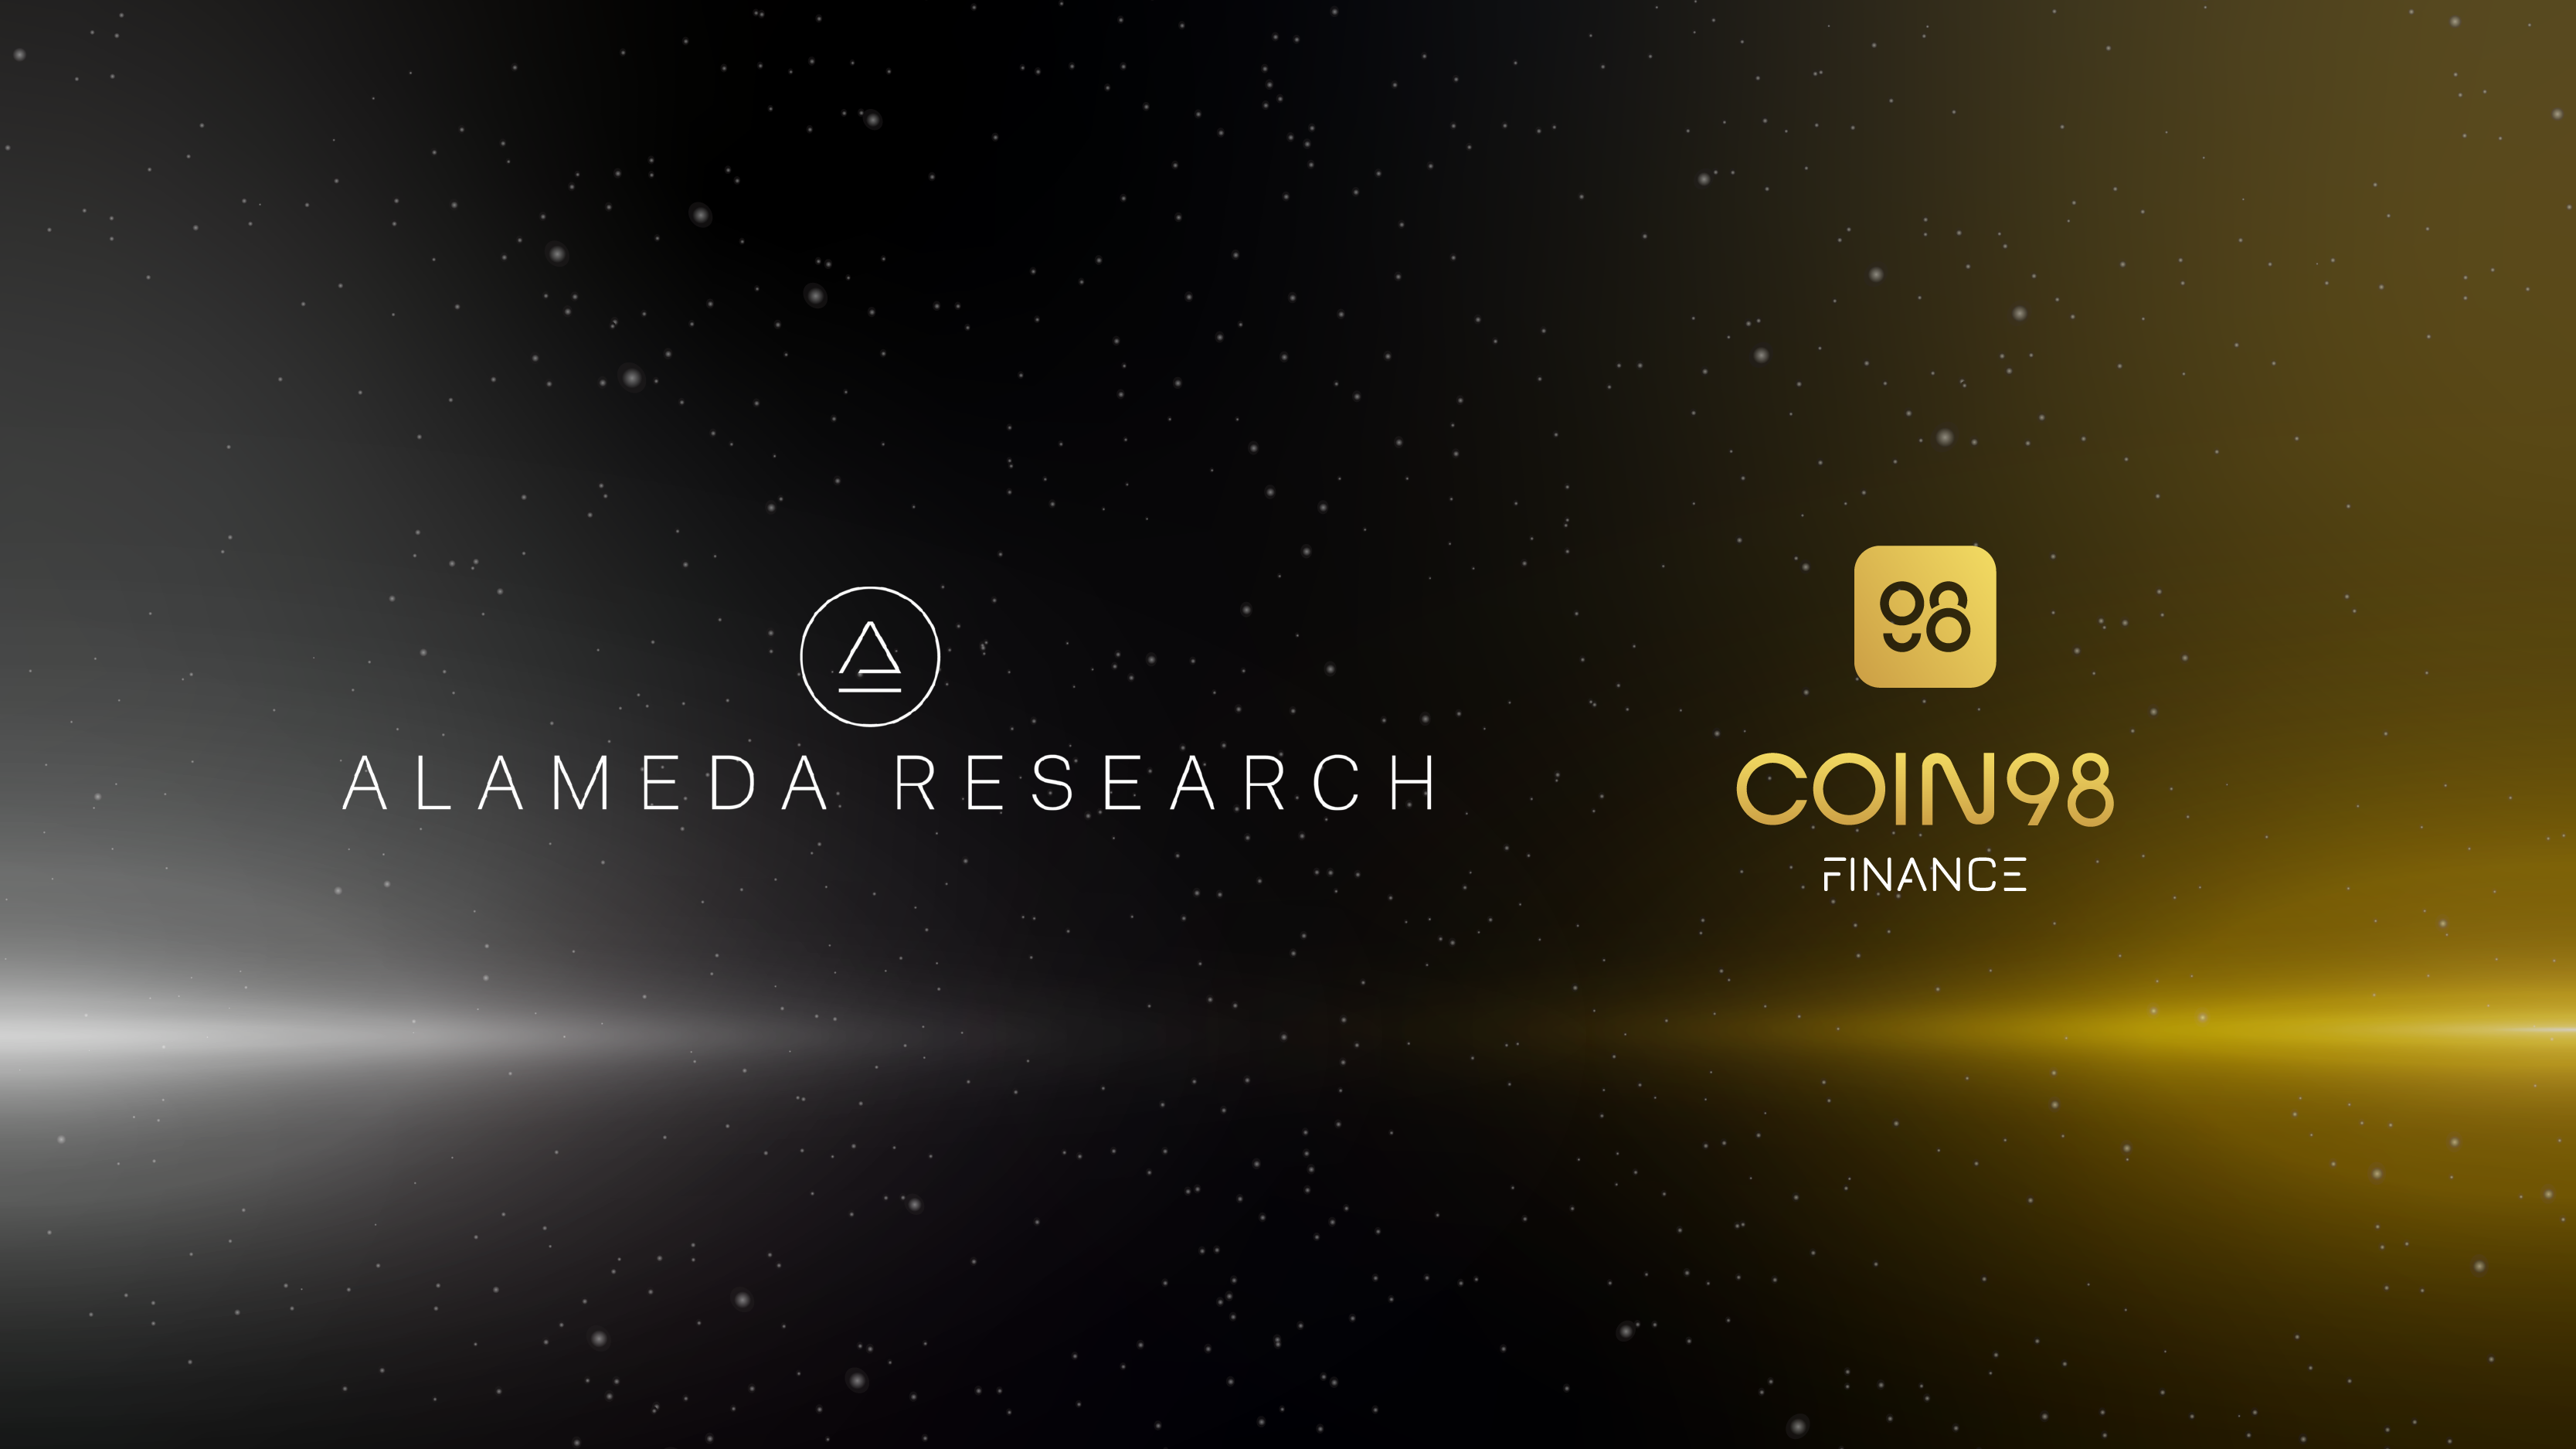 Coin98 Finance Raises $4 Million From Alameda Research